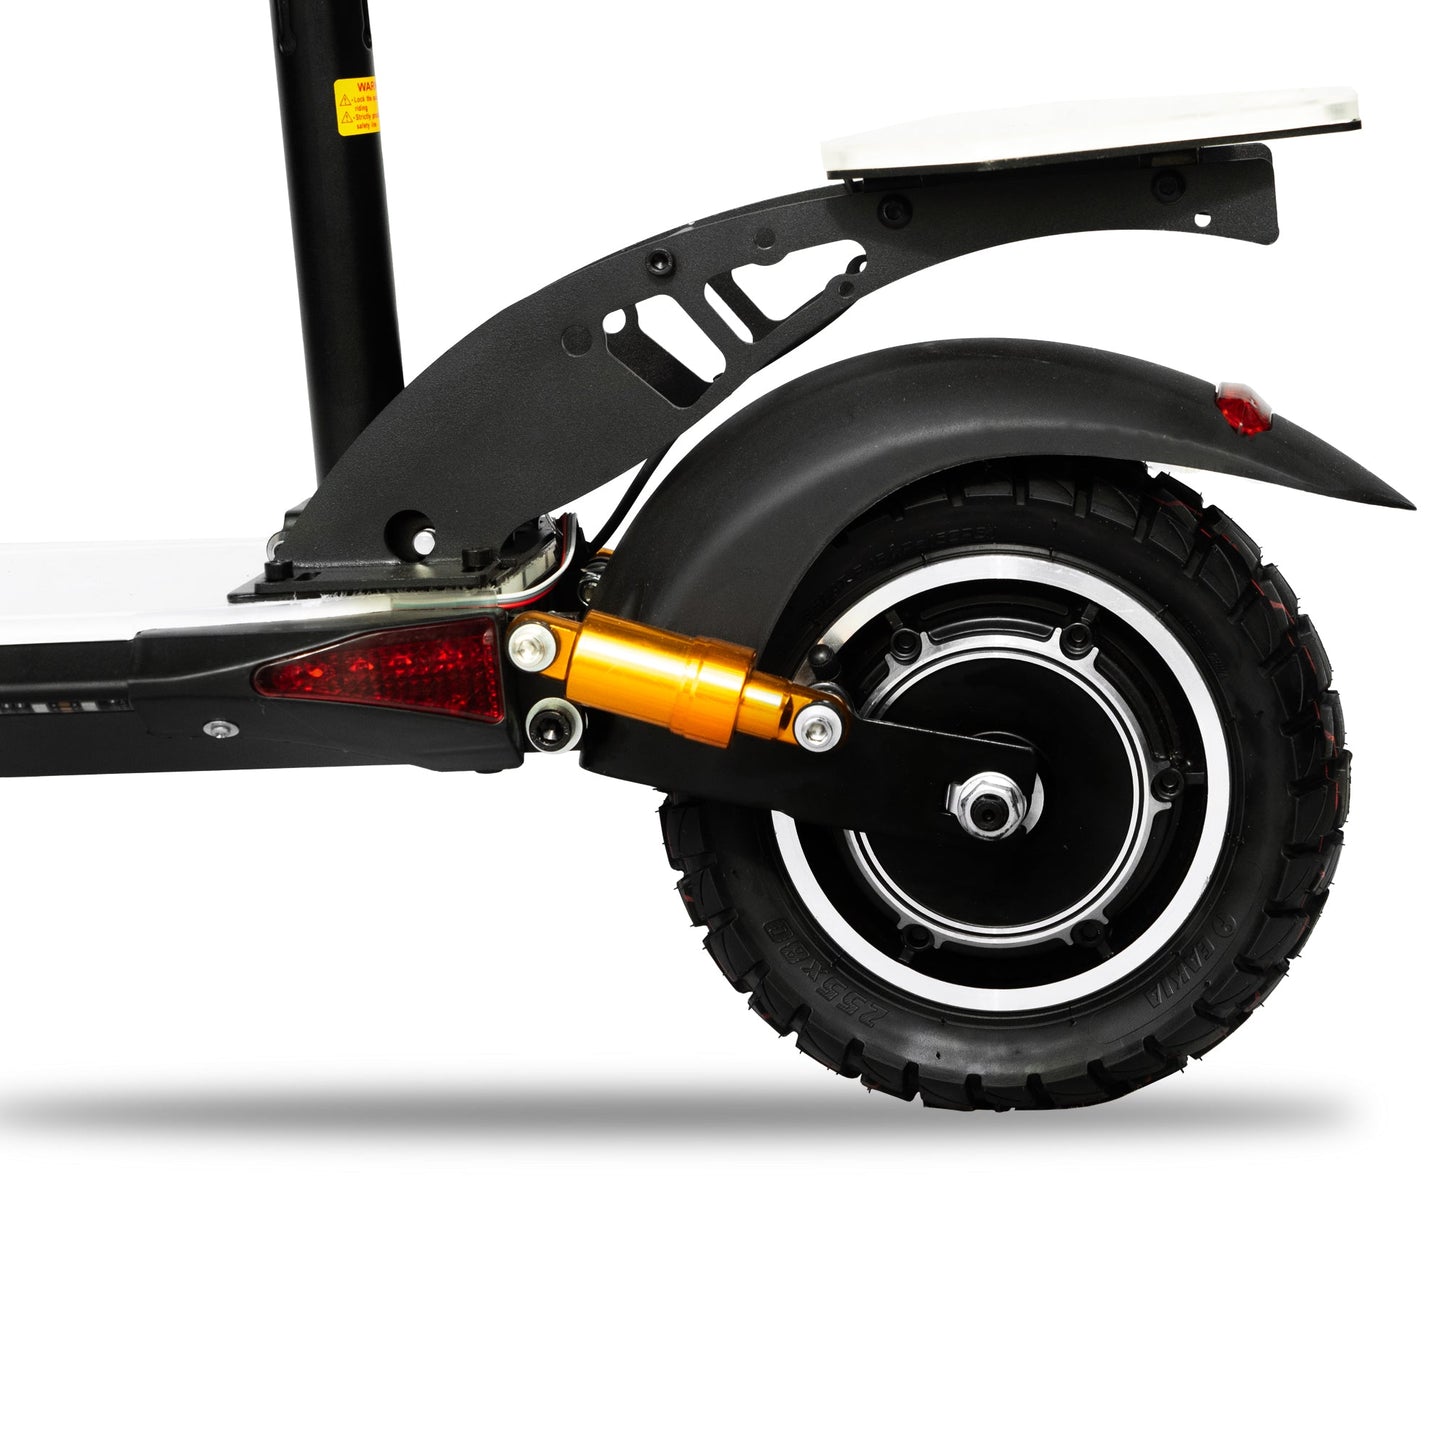 CRONY V10+ 1500W 10 inch Wide tire High configuration E-Scoote High Speed electric Scooter For Outdoor Road - Edragonmall.com